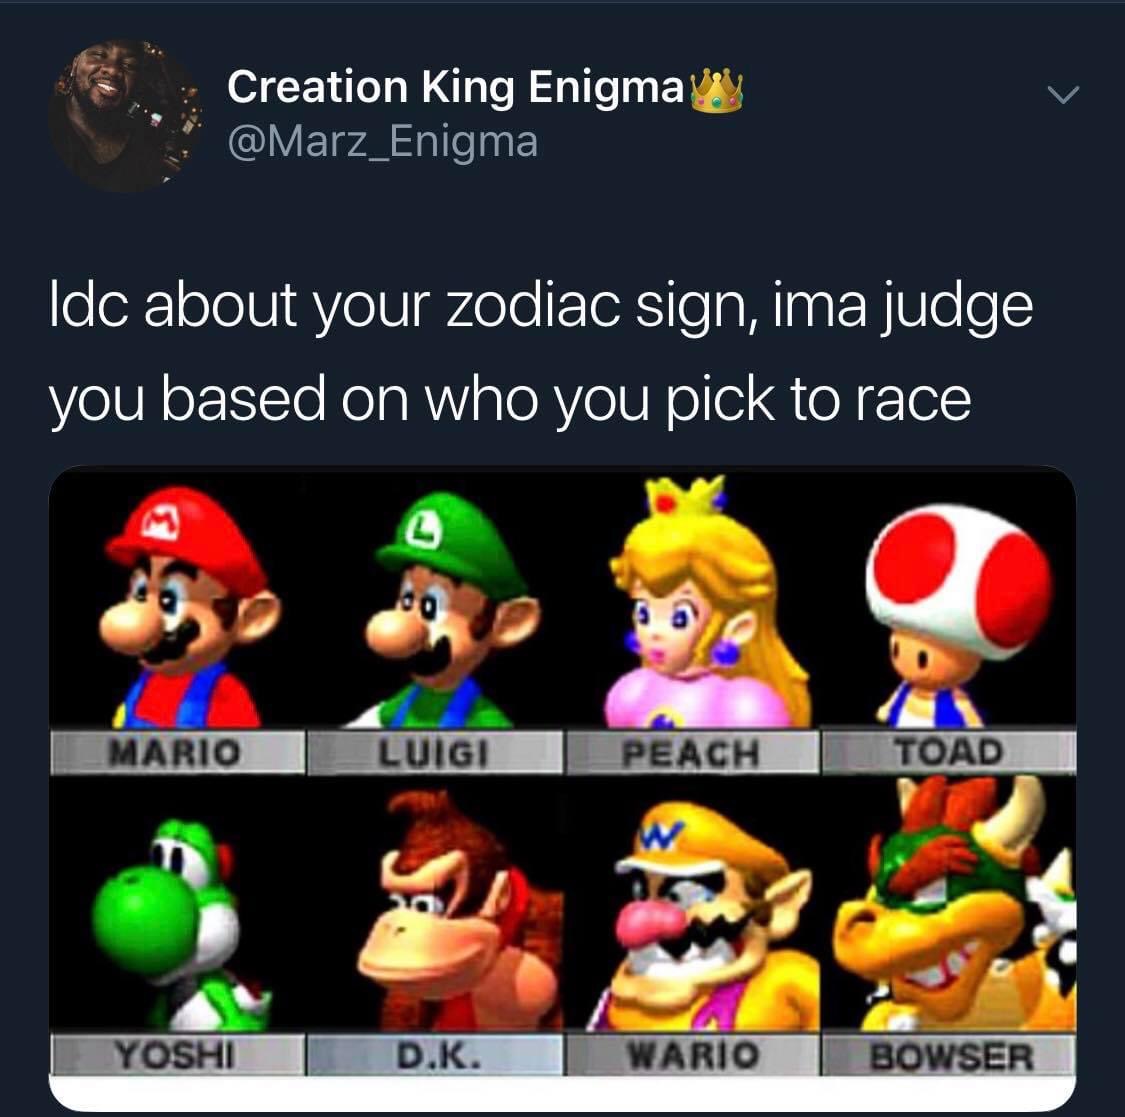 officials on council to reopen america meme - Creation King Enigma Idc about your zodiac sign, ima judge you based on who you pick to race M Mario Luigi Peach Toad Yoshi D.K. Wario Bowser